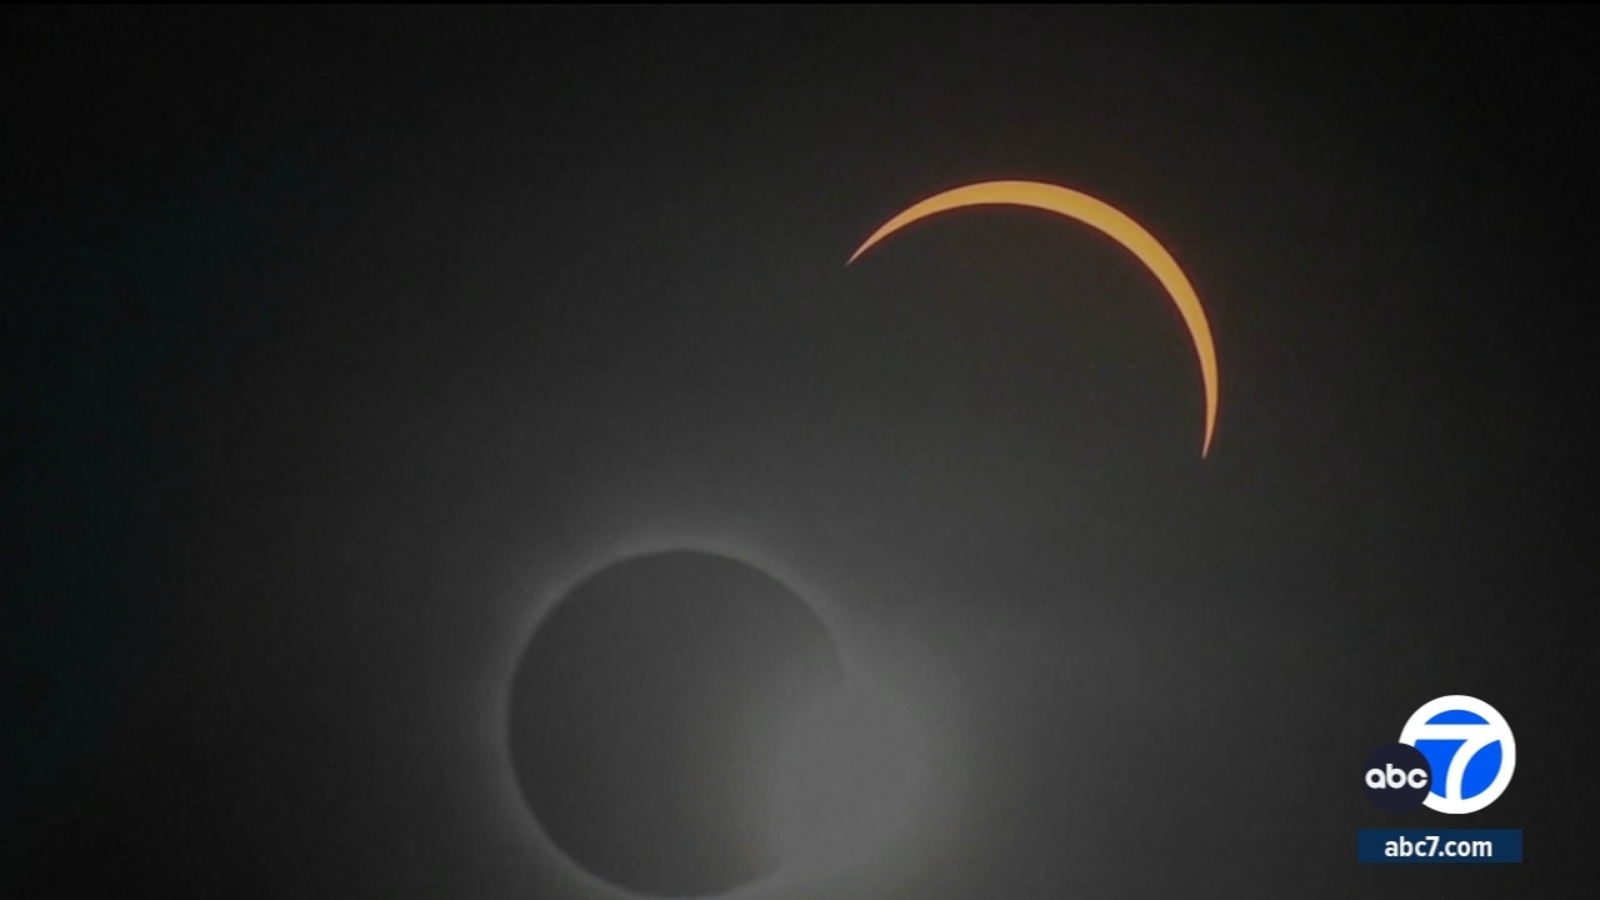 2024 total solar eclipse to move across U.S. Will it be visible in